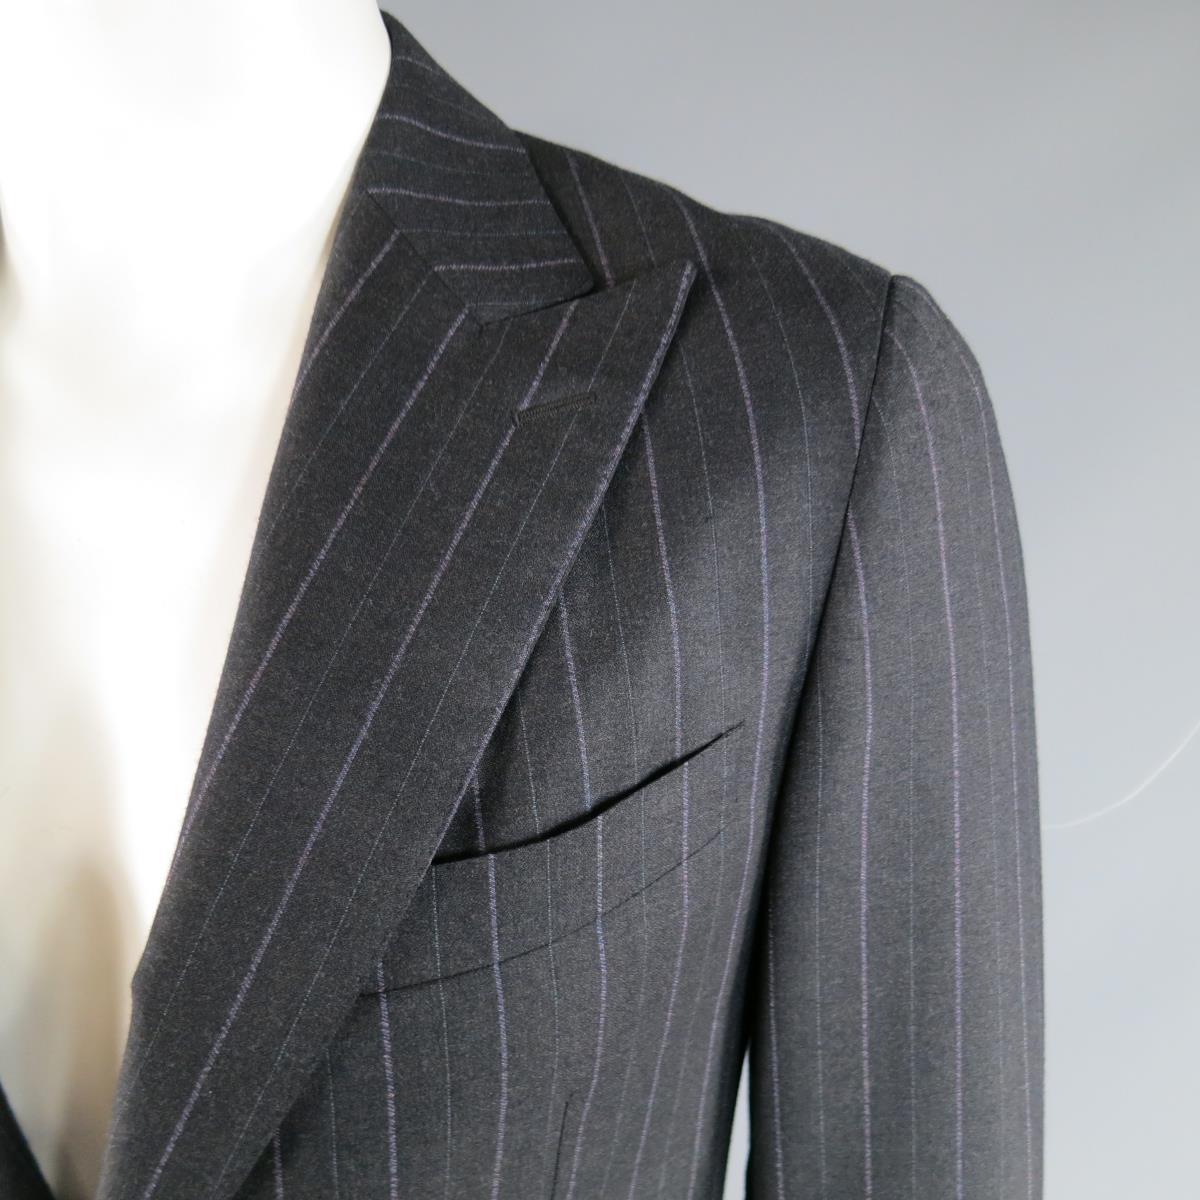 PAL ZILERI 40 Regular Charcoal & Lavender Striped Wool/Cashmere Peak Lapel Suit In Excellent Condition For Sale In San Francisco, CA